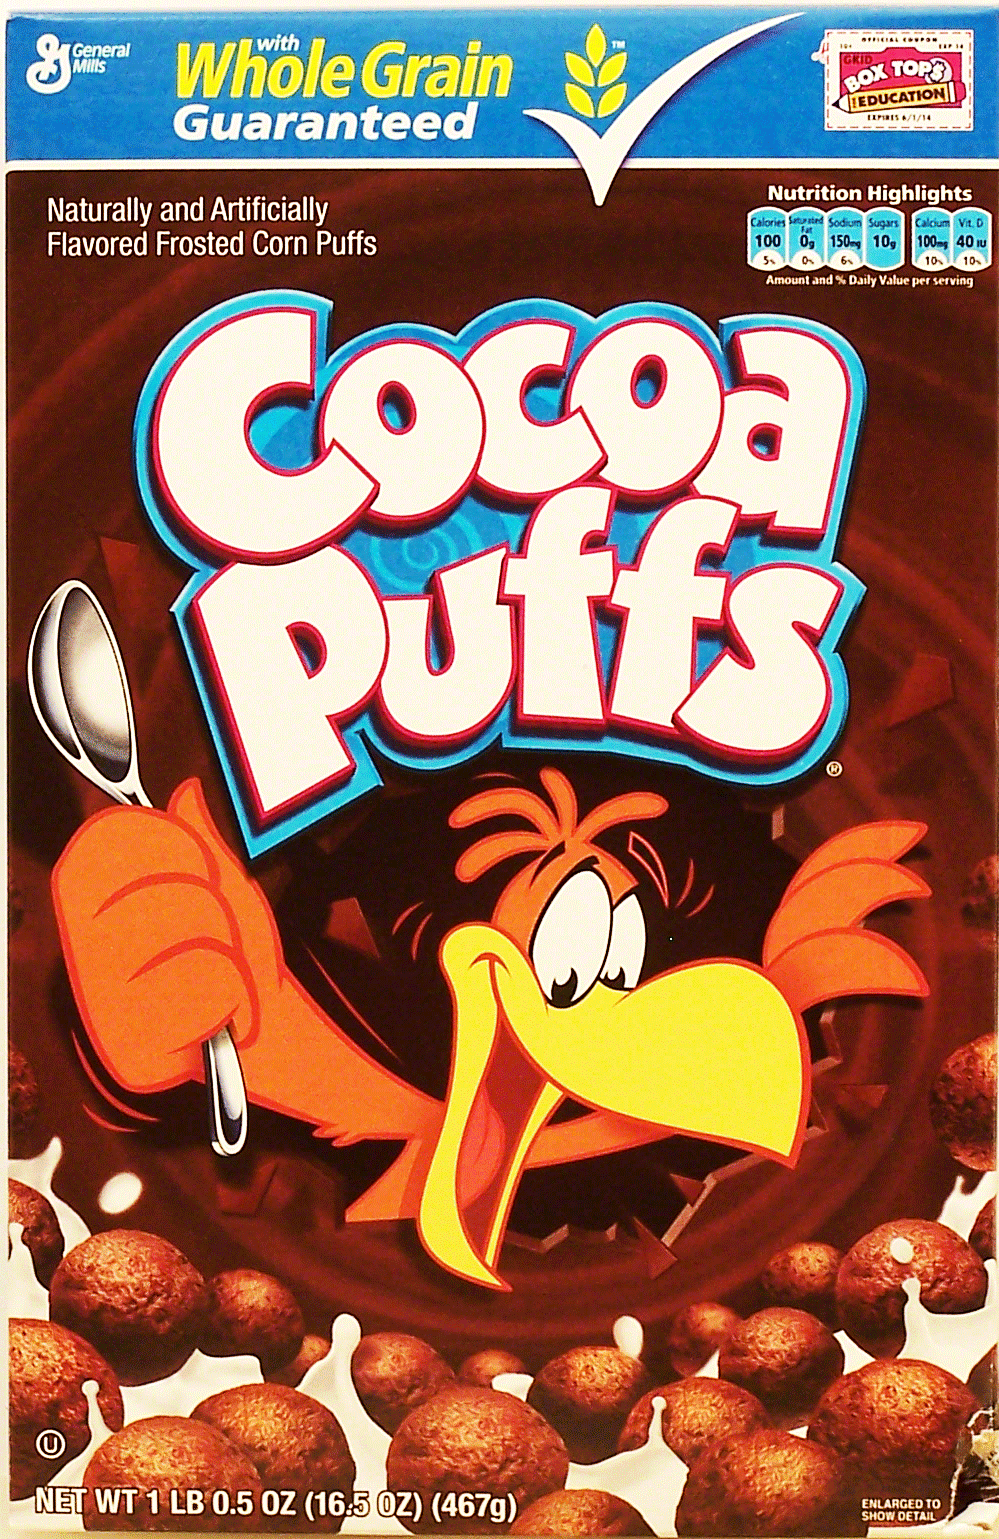 General Mills Cocoa Puffs flavored frosted corn puffs Full-Size Picture